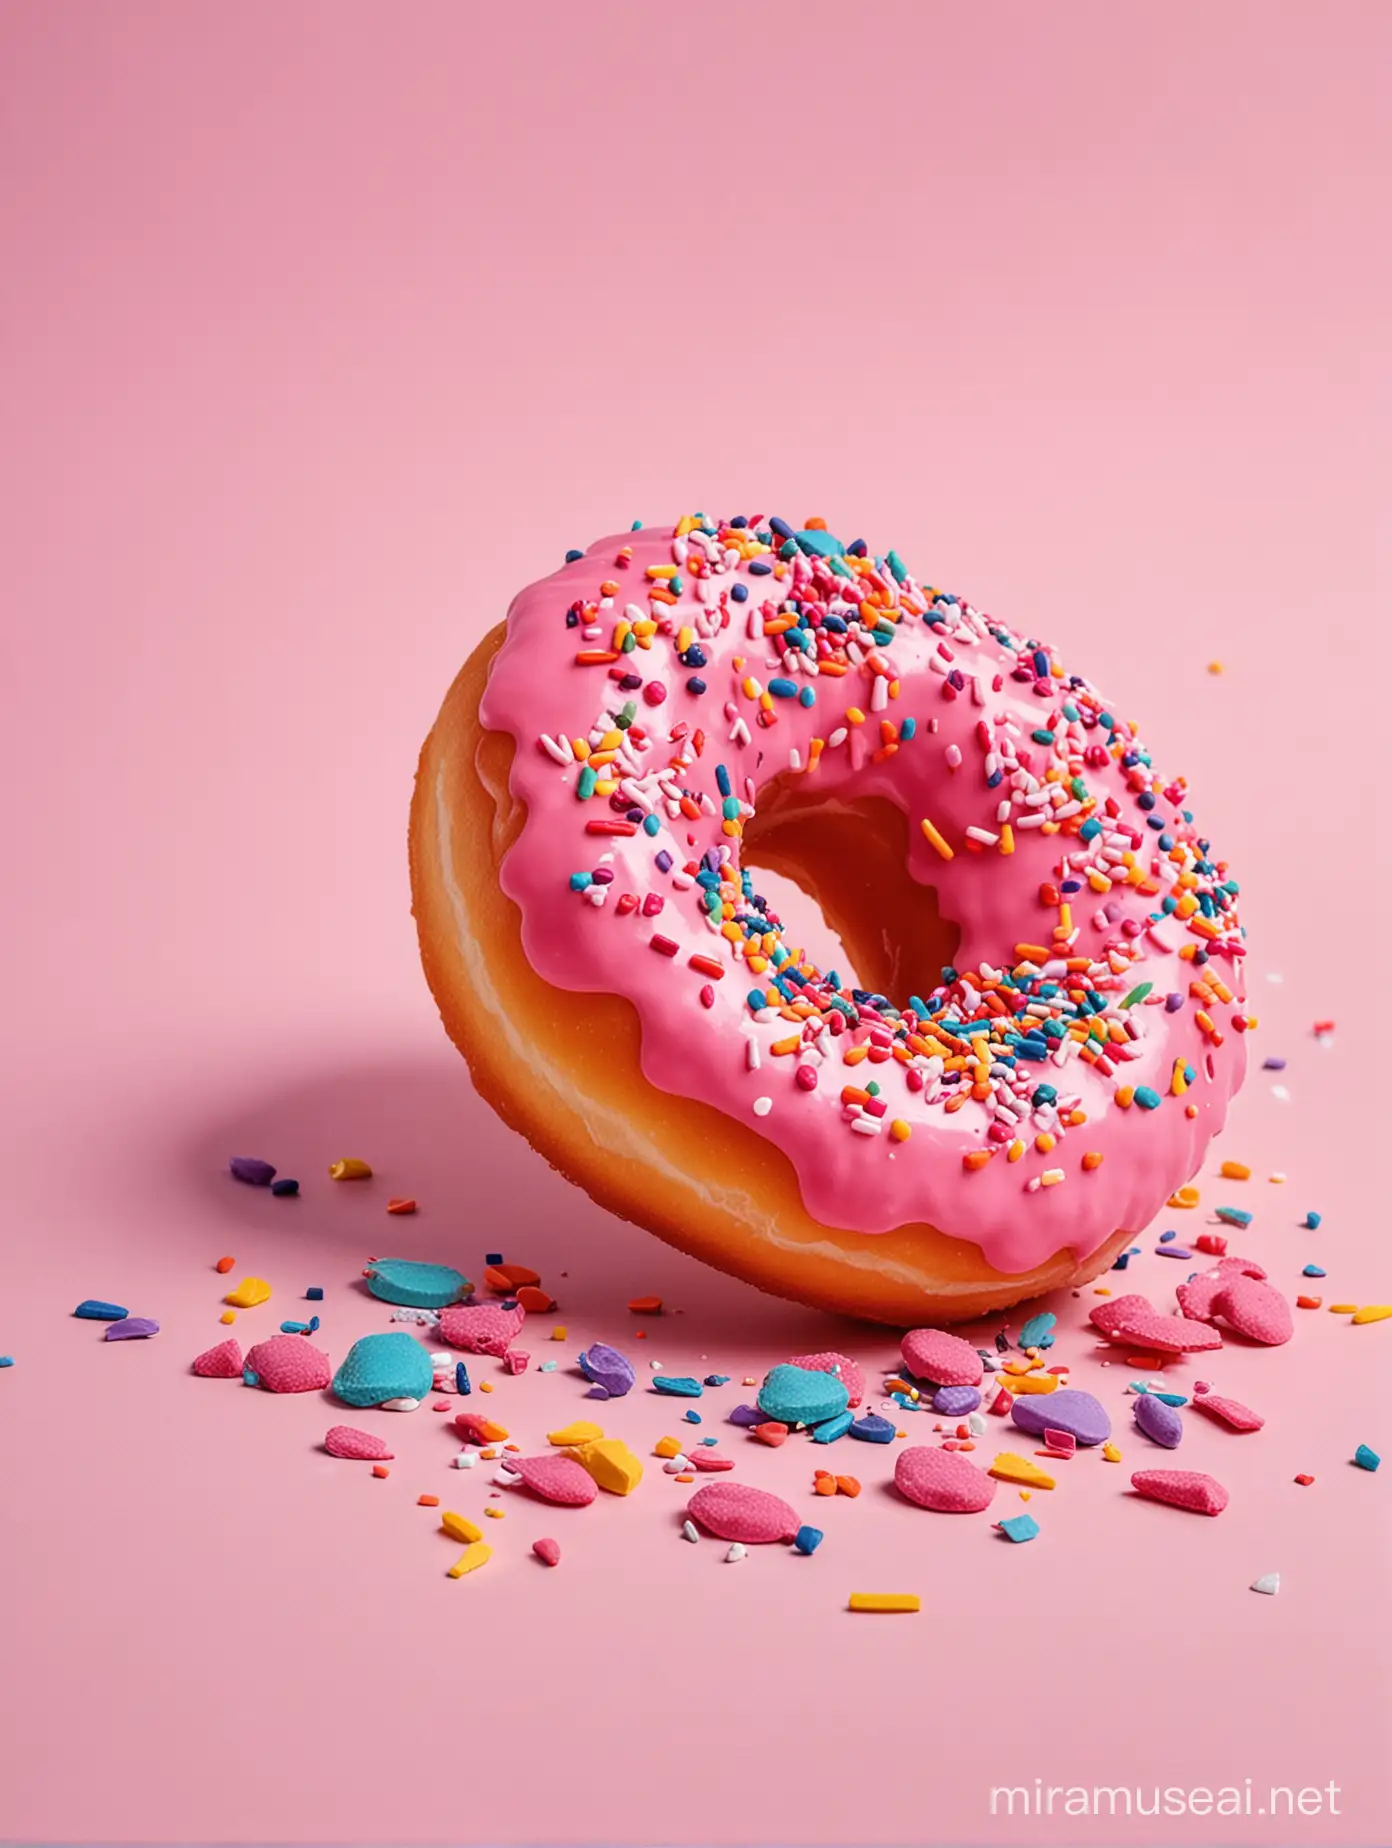 Vibrant Pink Donut Over Colorful Chips Low Angle Perspective View